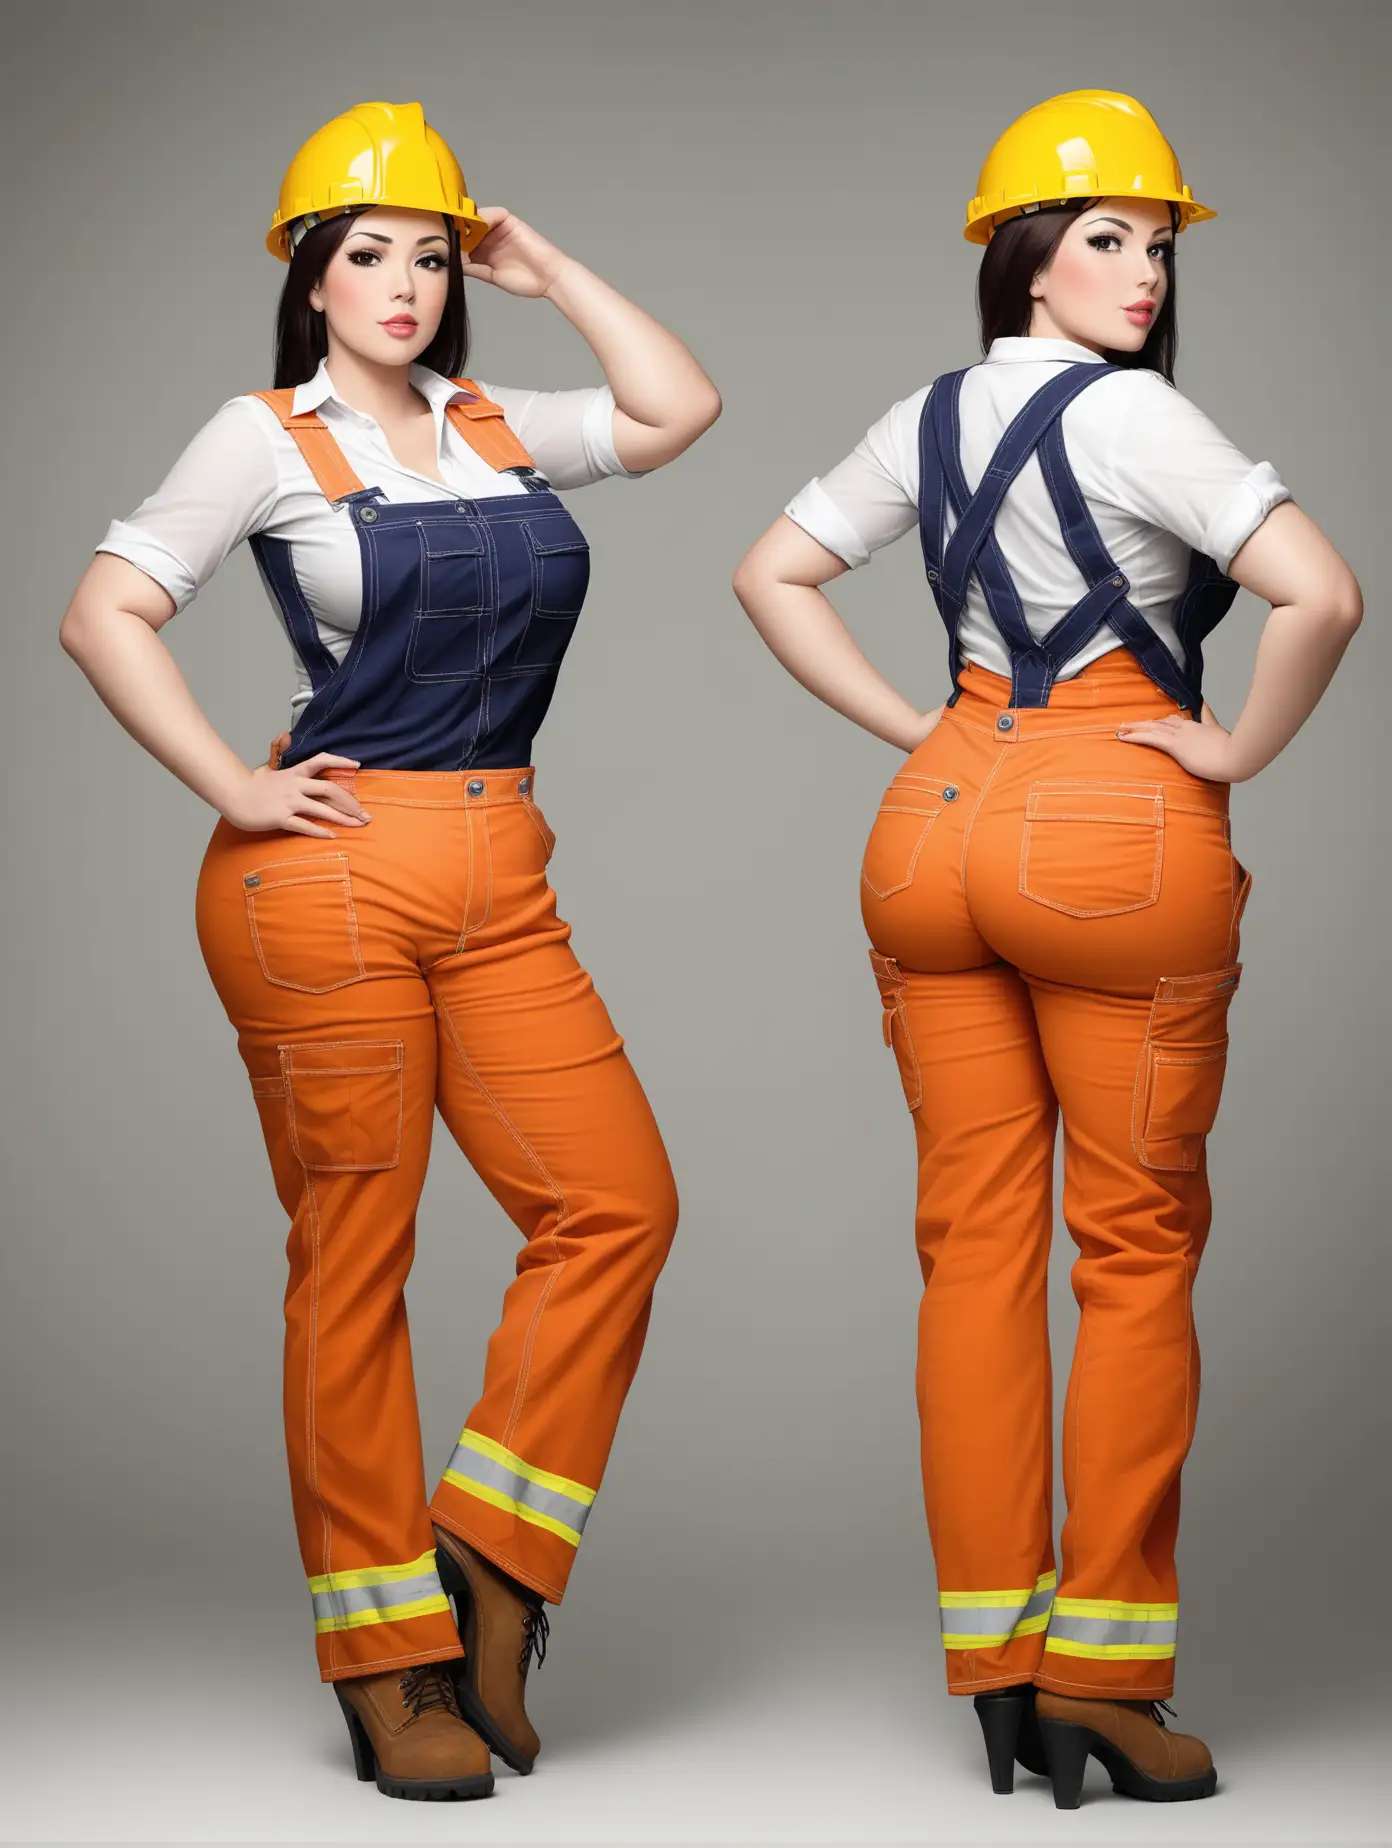 Sensual picture of a hot girl, age 30, builder outfit, big ass, 2 poses, full body